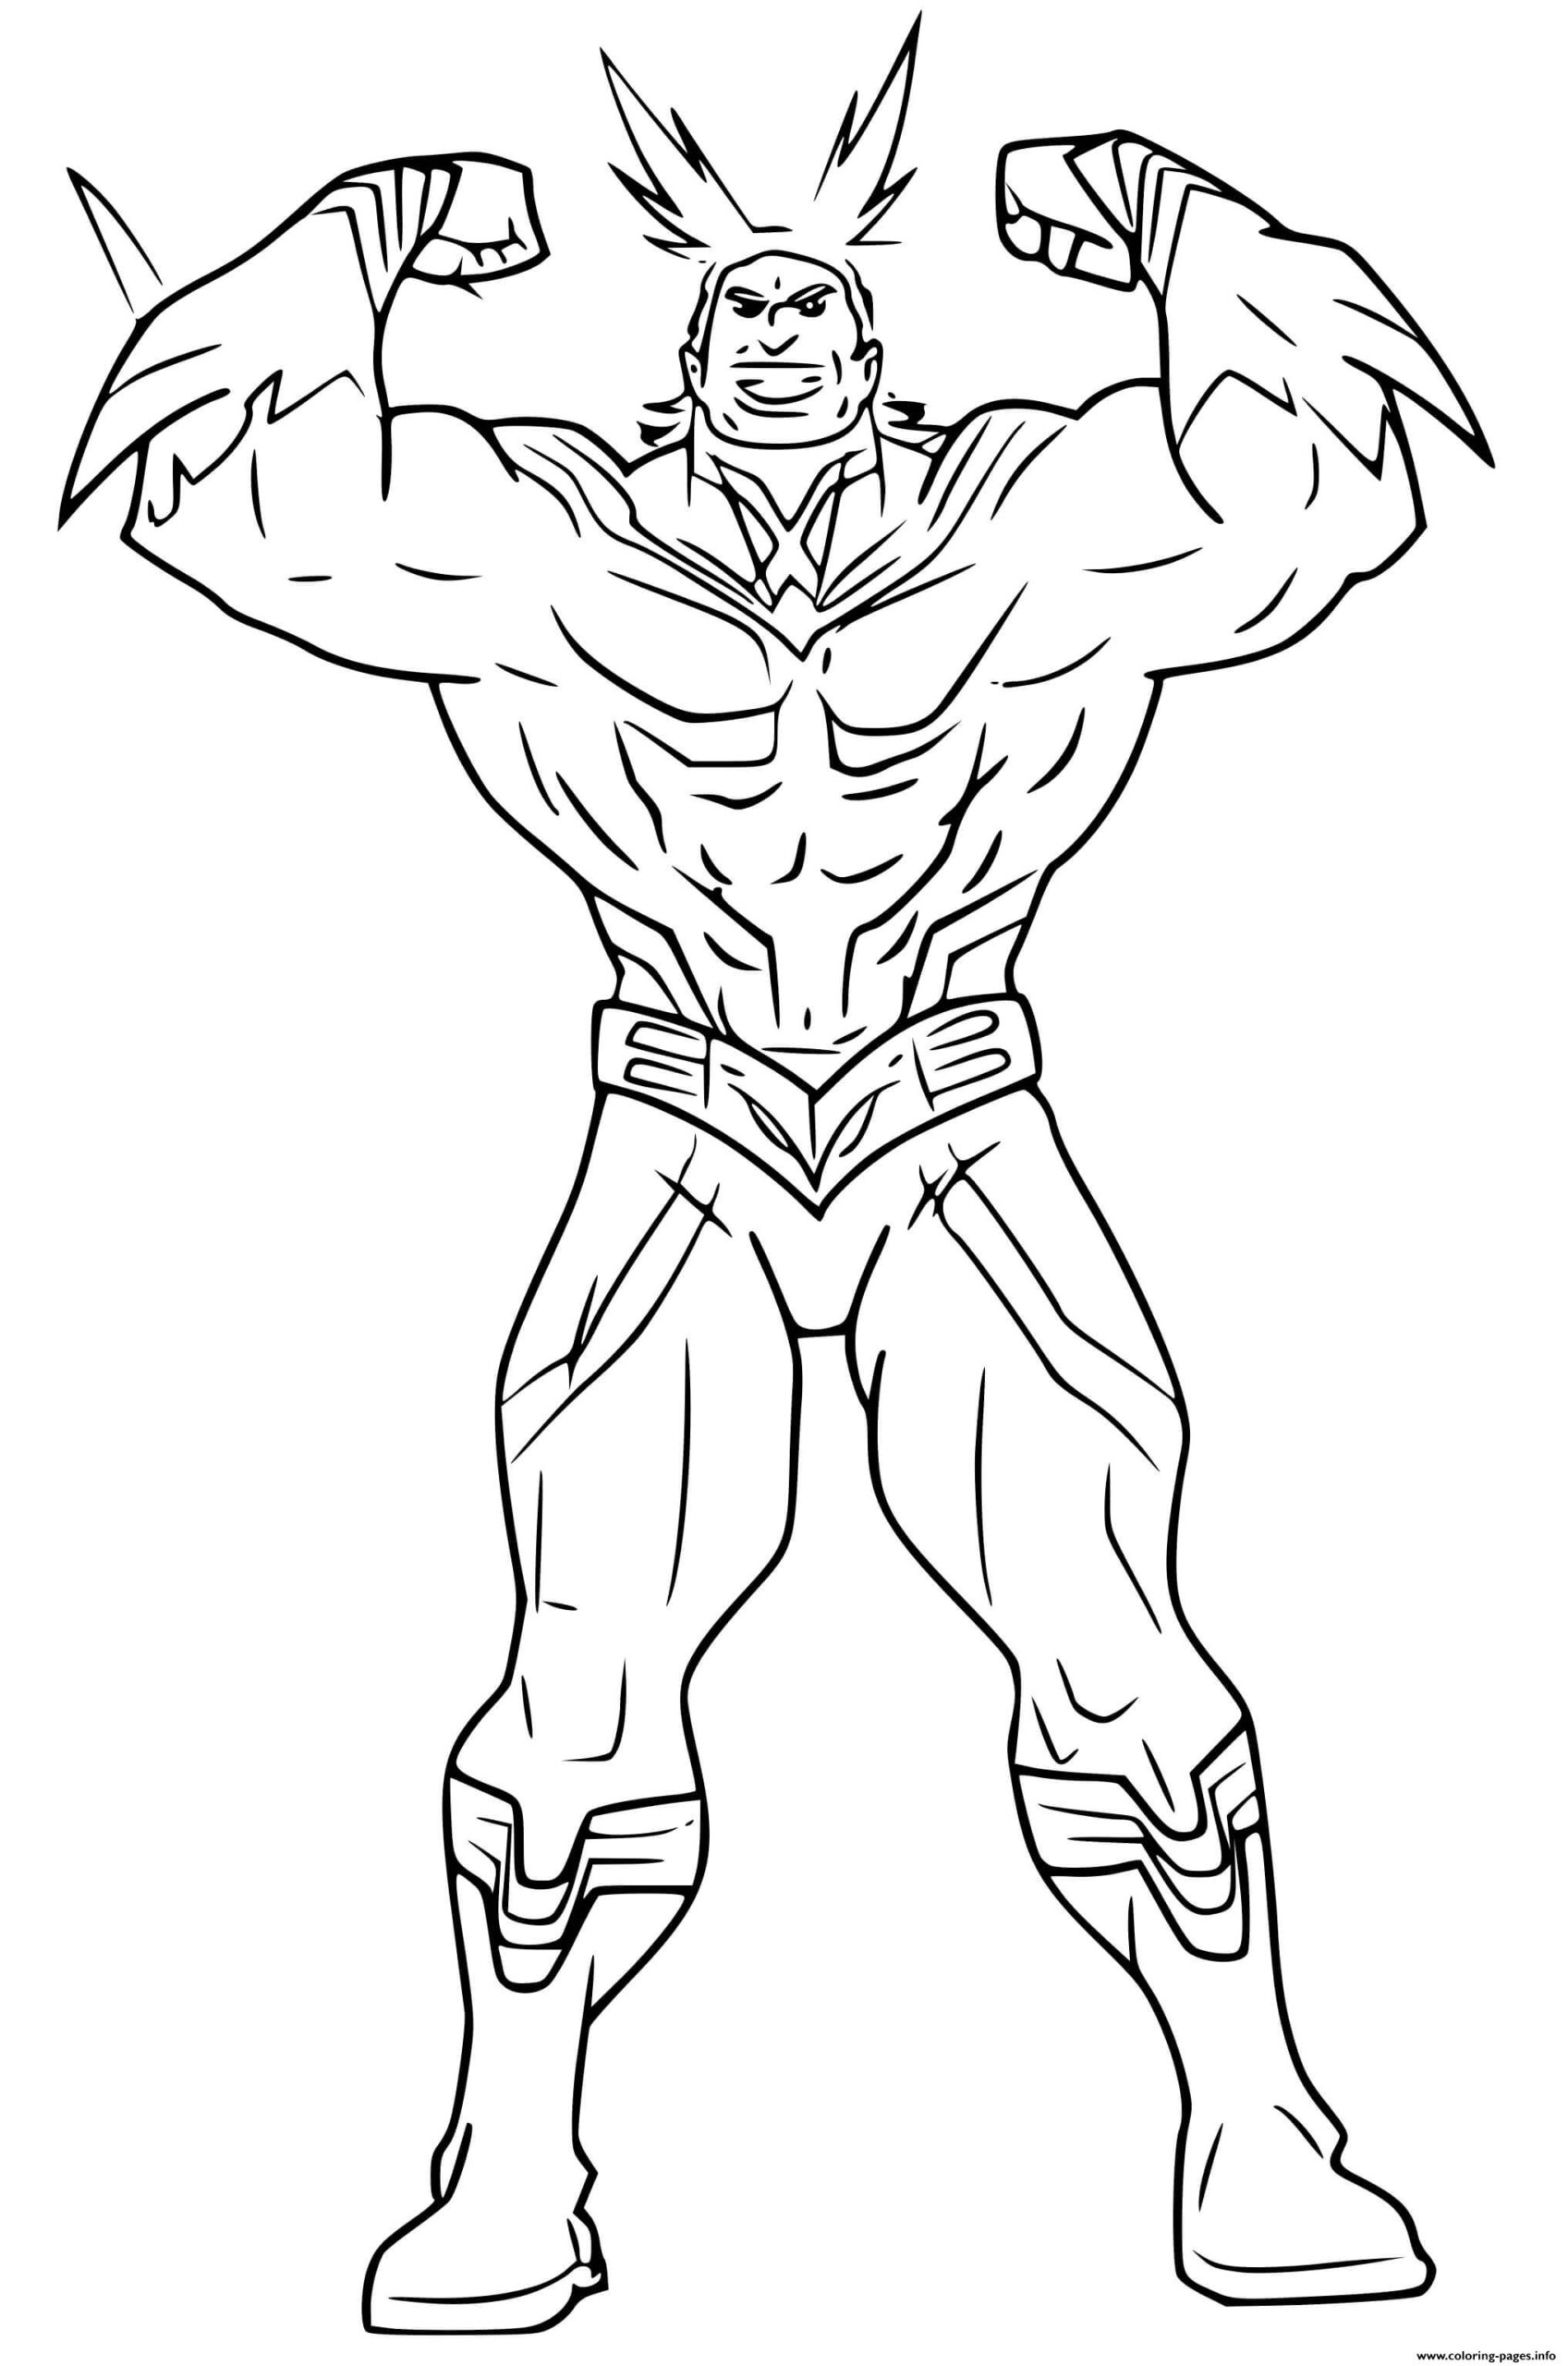 My Hero Academia All Might Manga Coloring Page Printable tout My Hero Academia Dessin A Imprimer